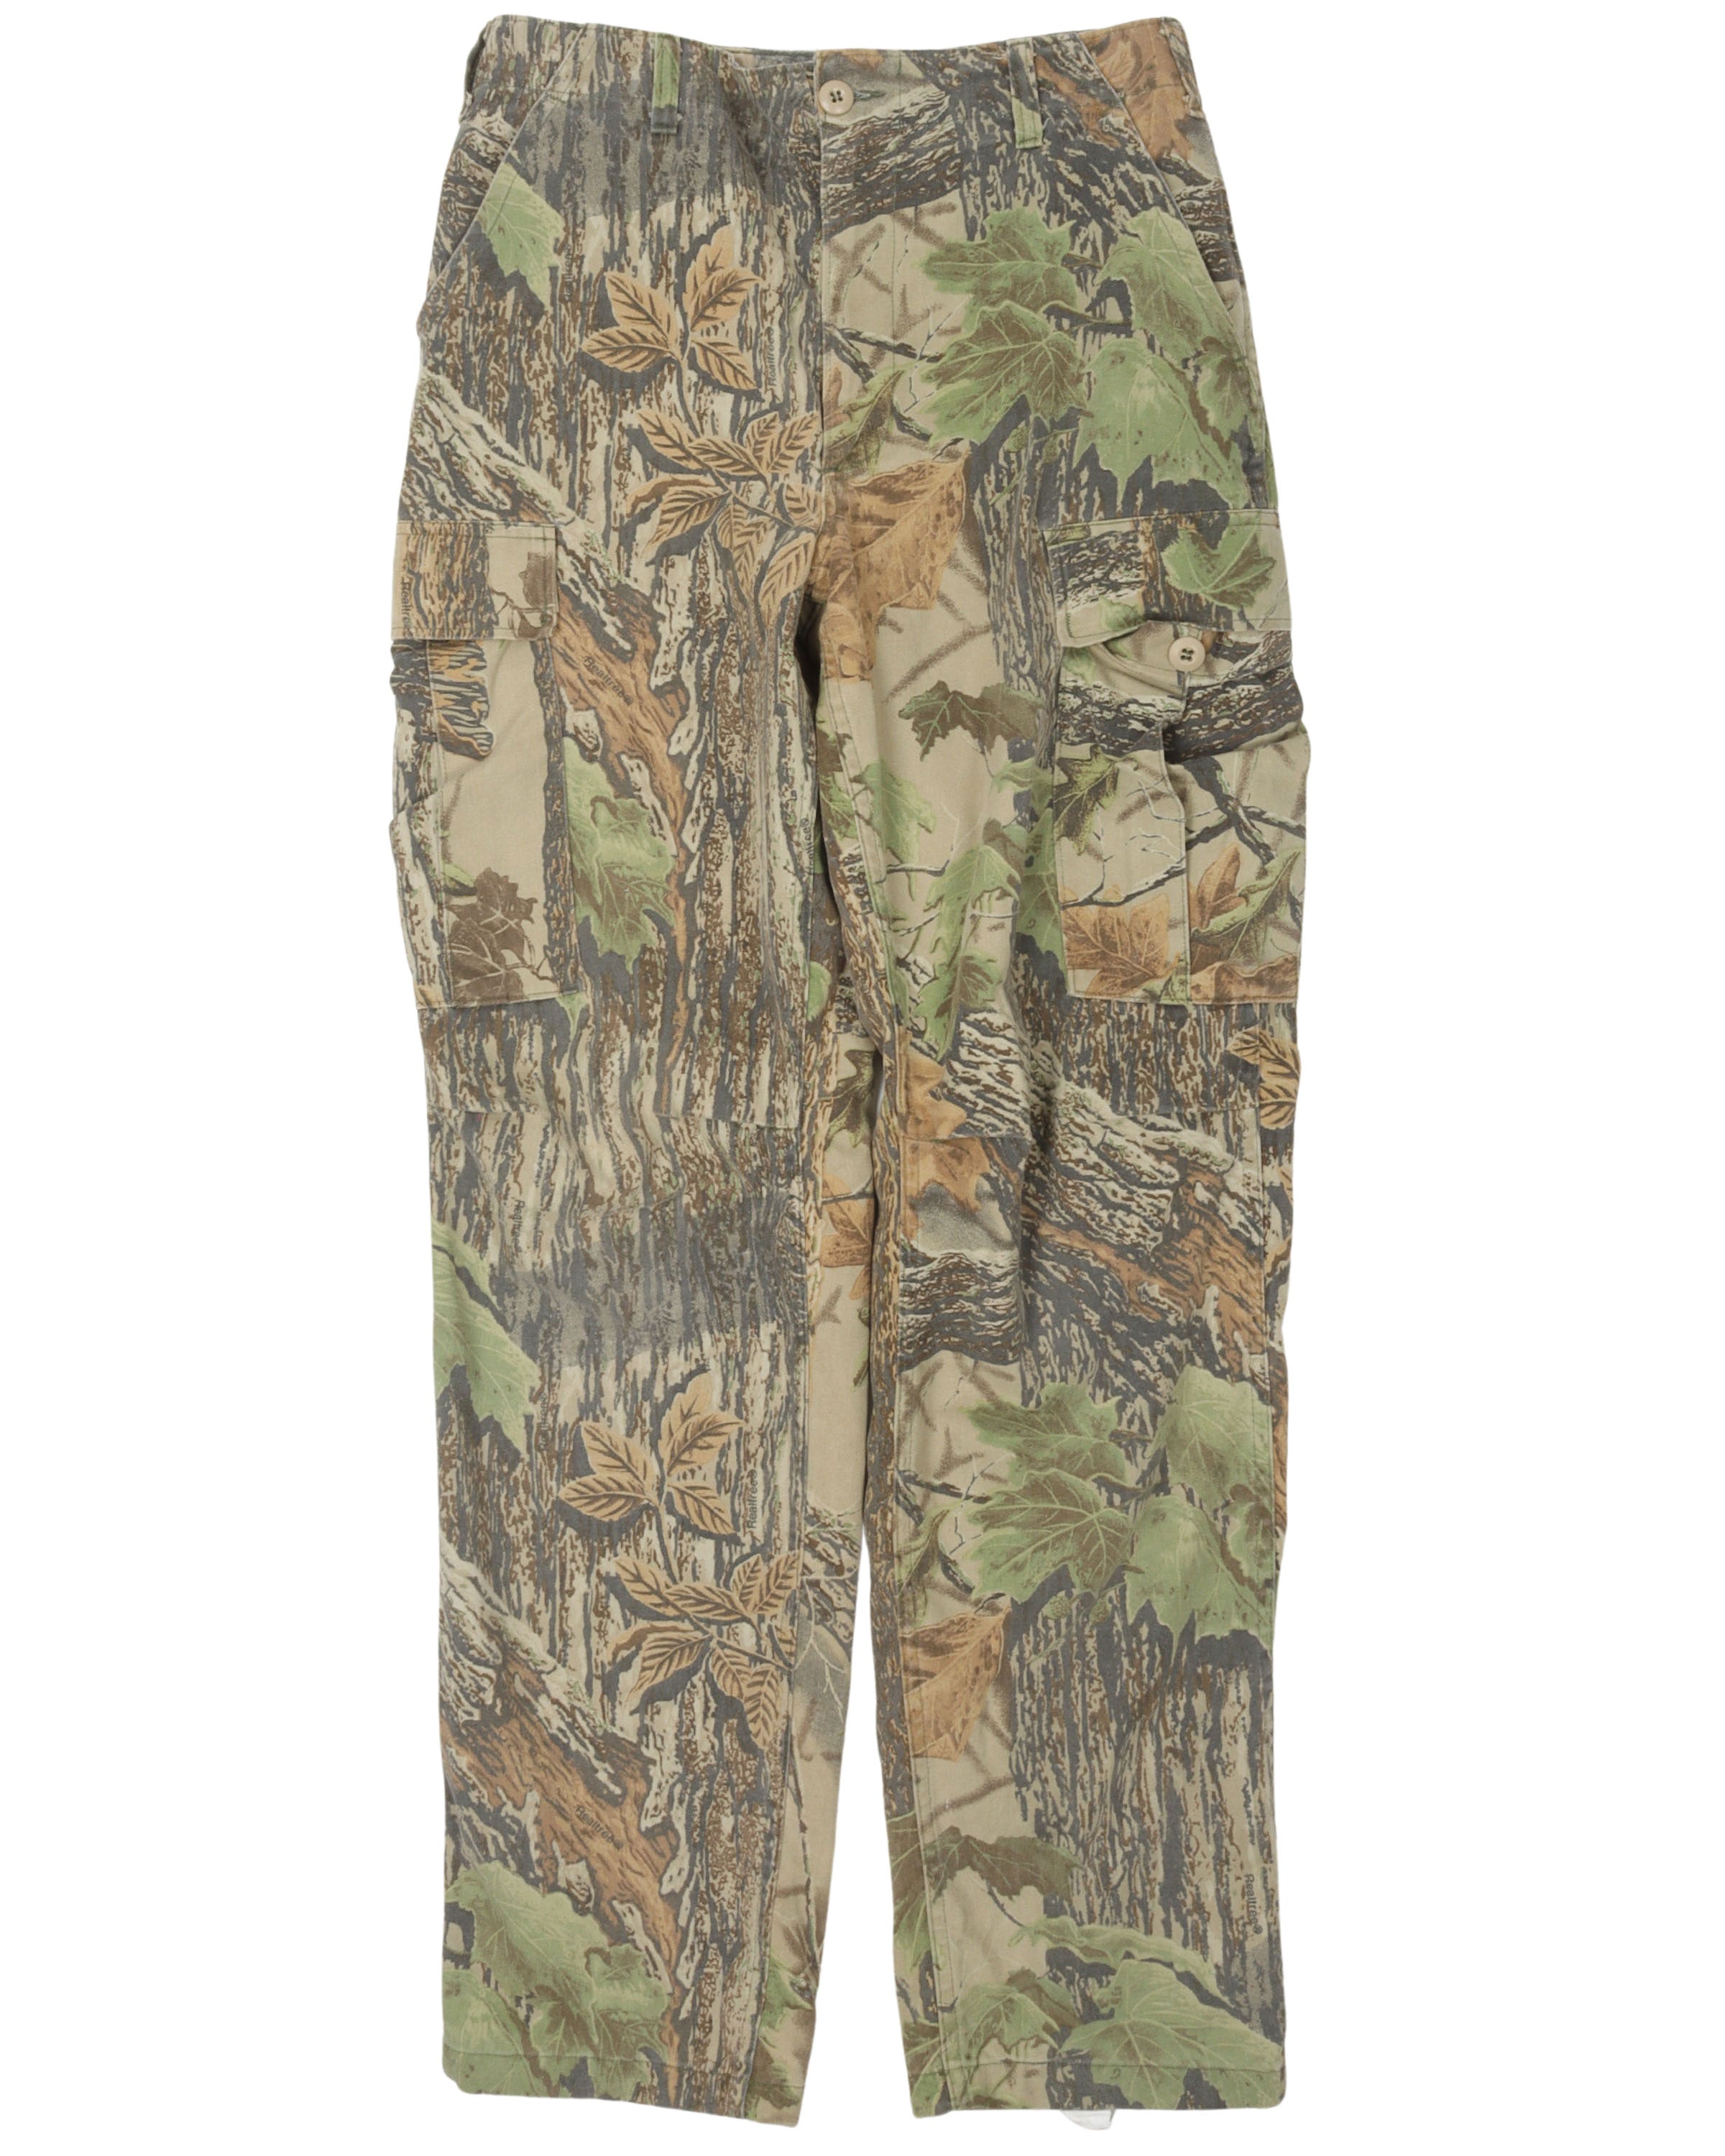 Rattlers RealTree Camouflage Cargo Pants